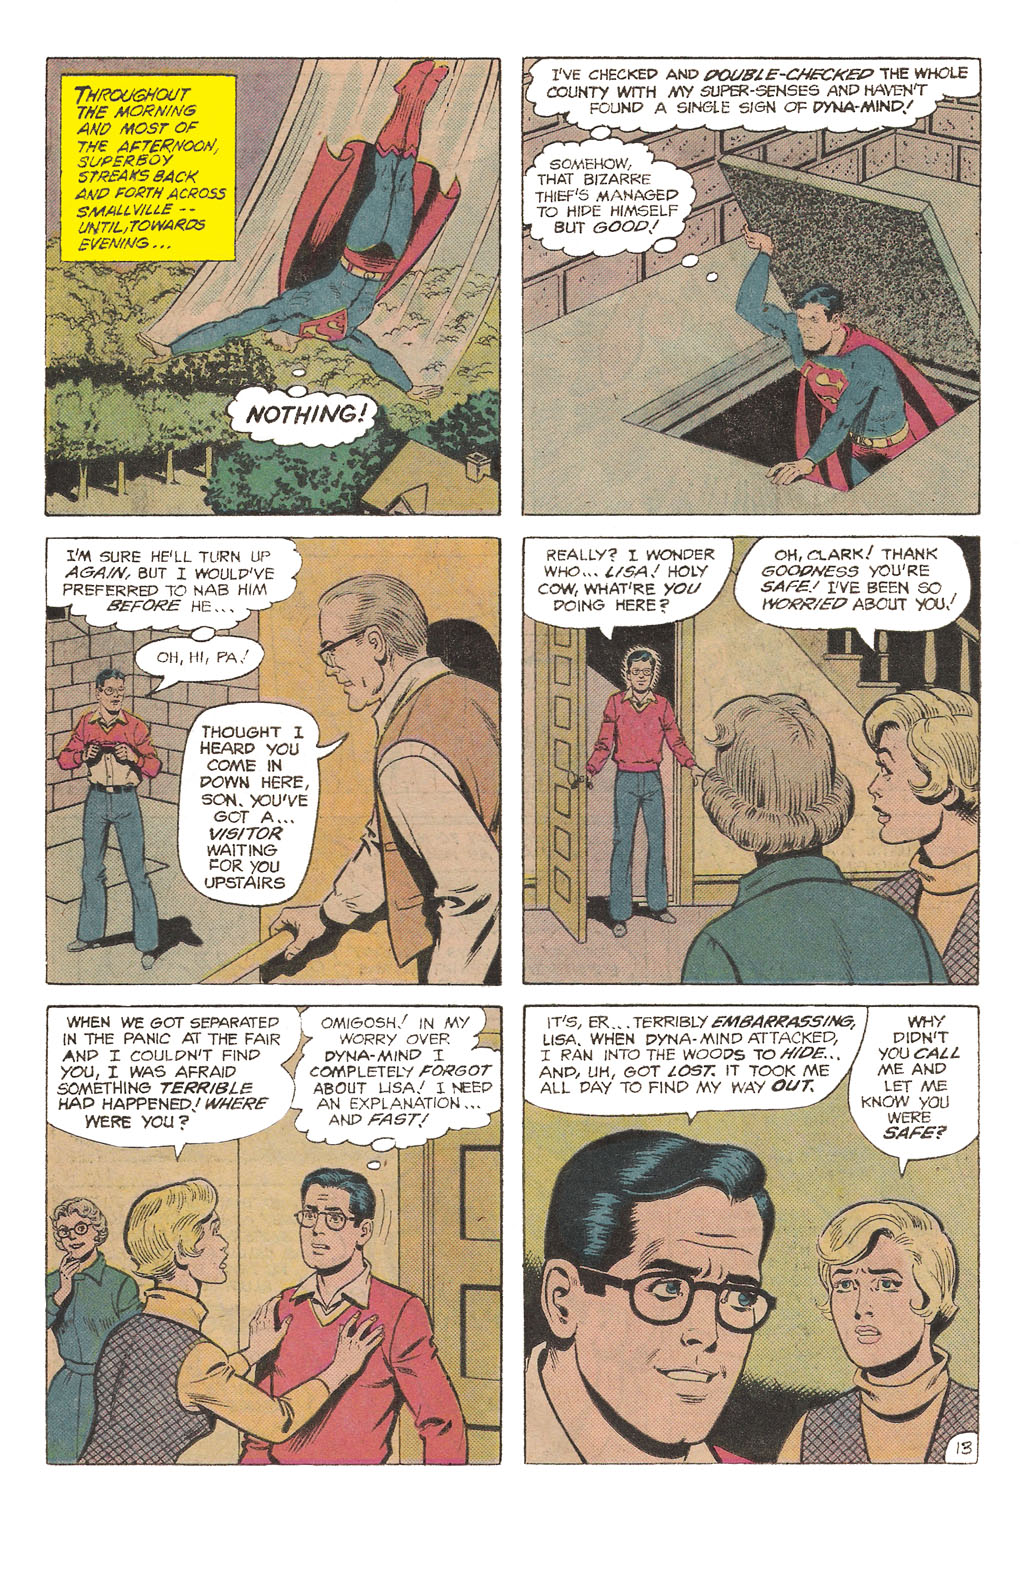 The New Adventures of Superboy 42 Page 13